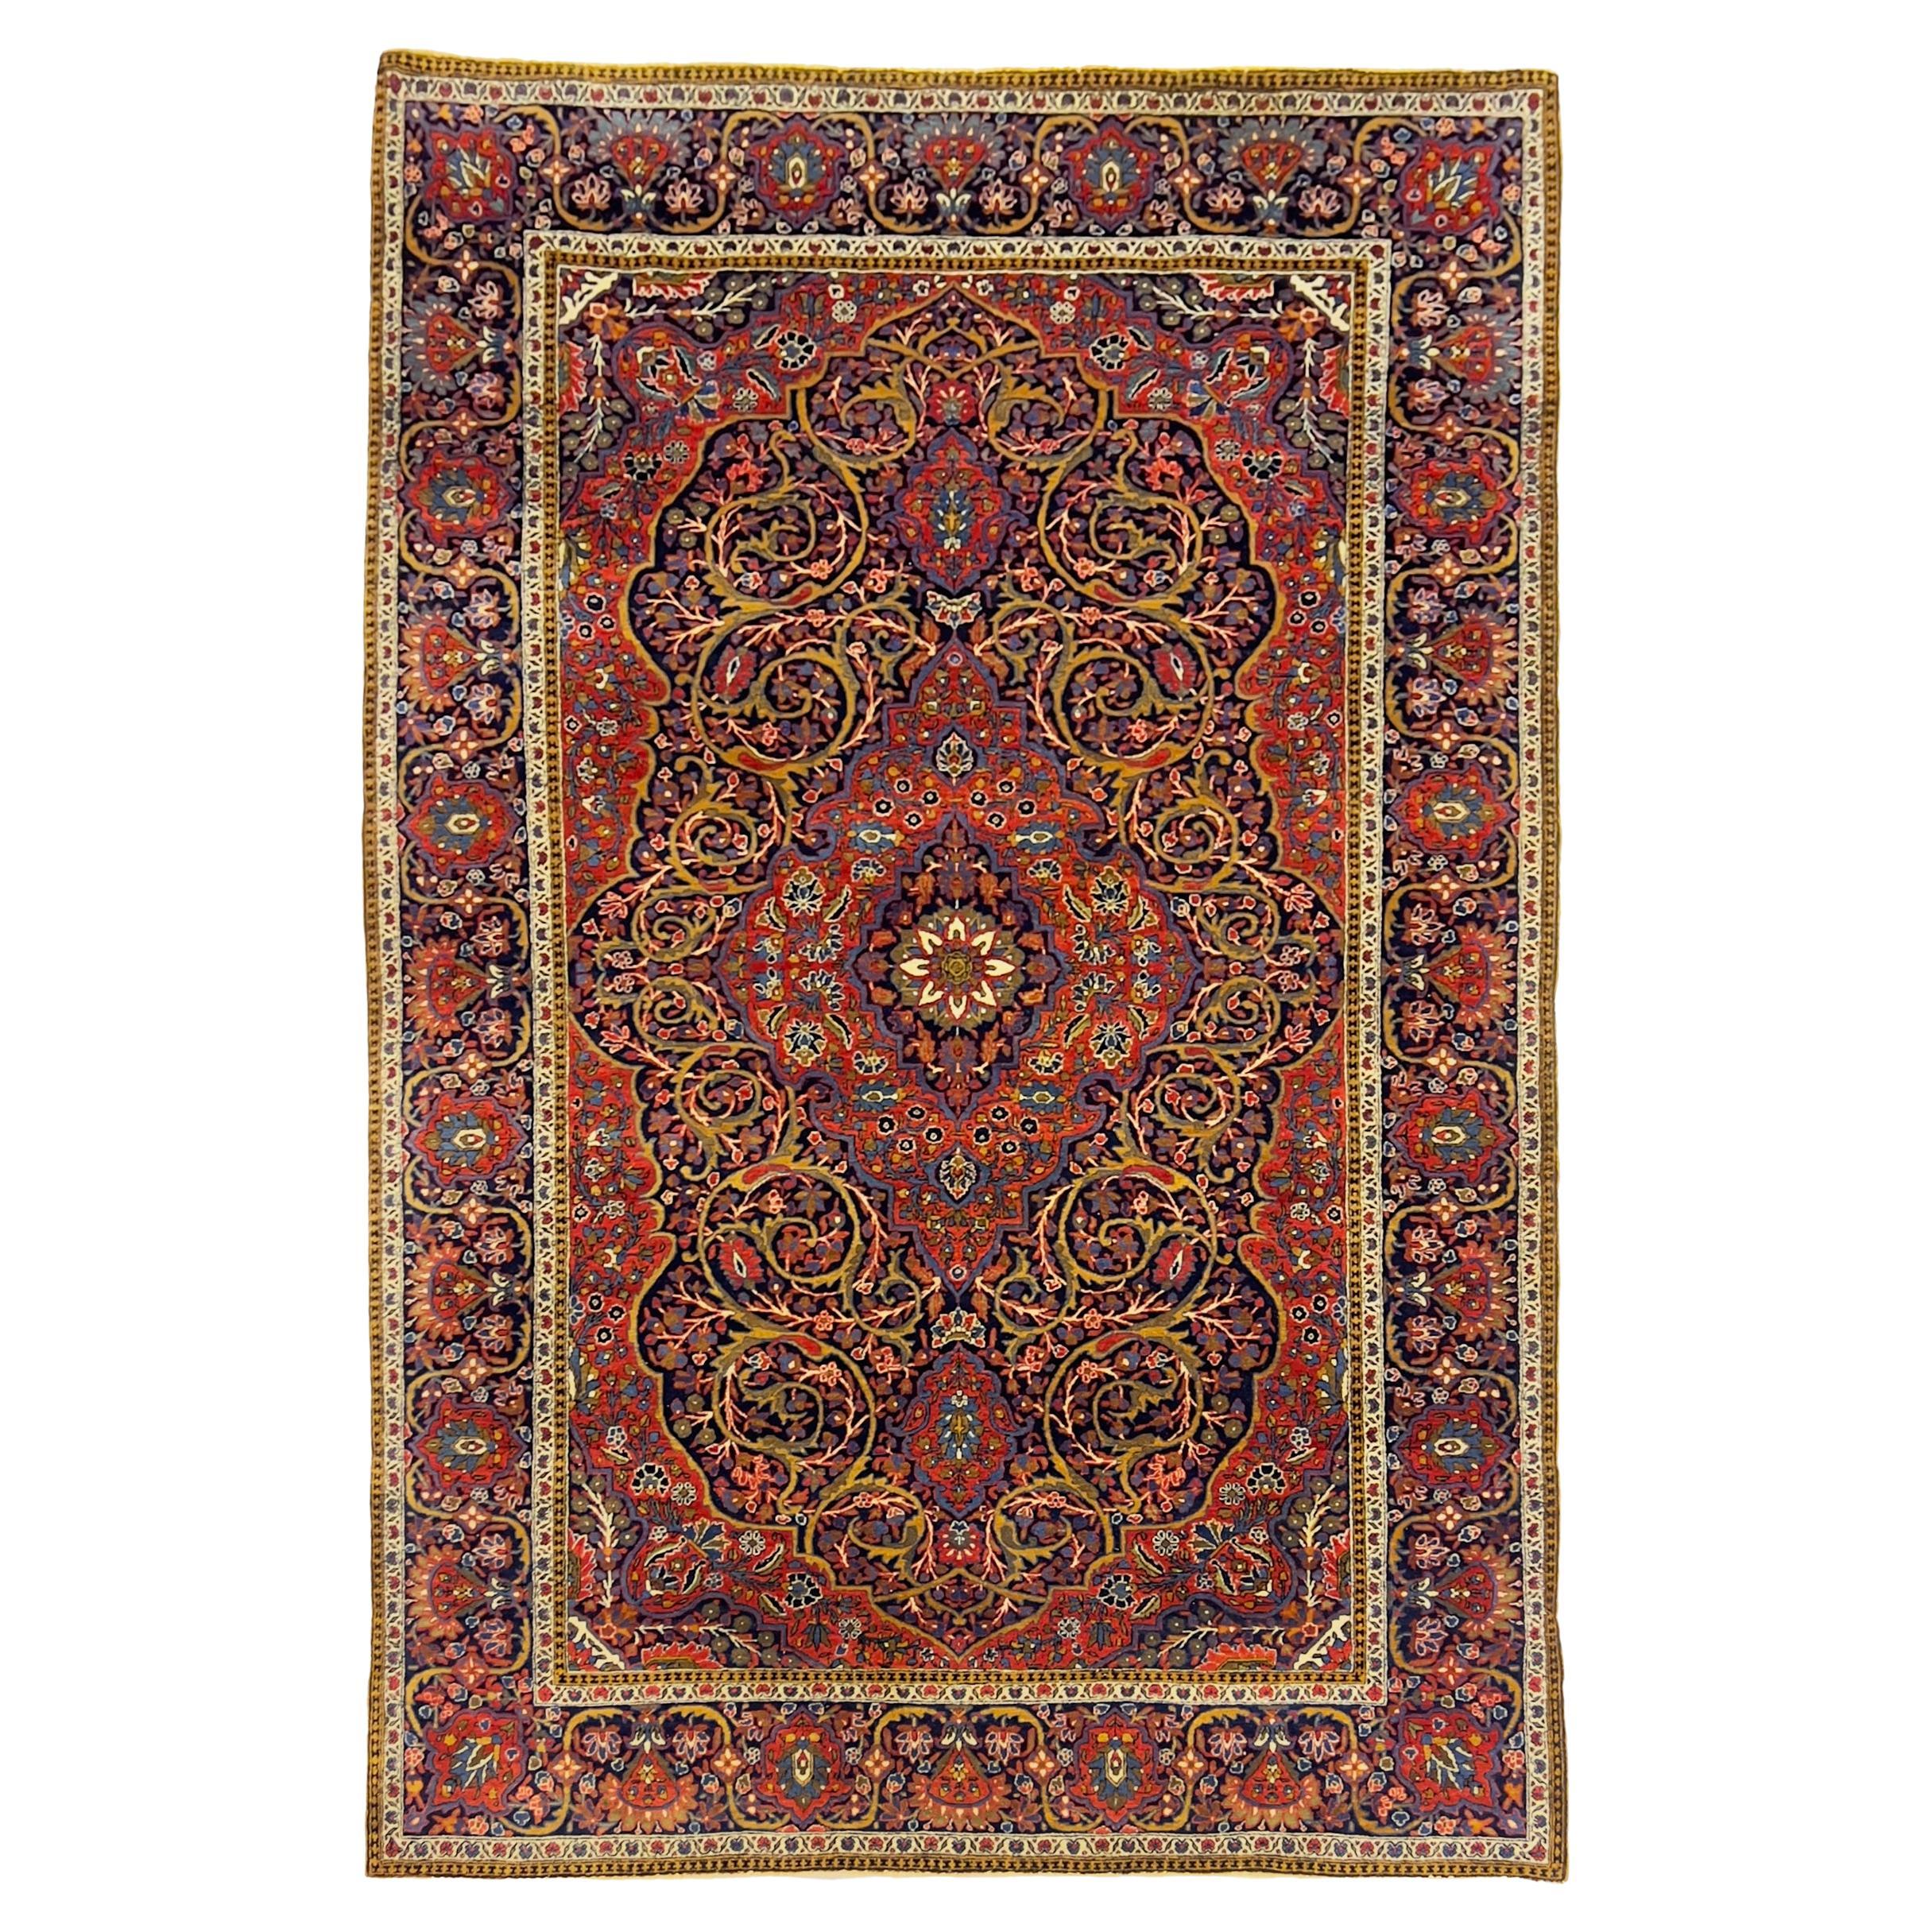  Exquisite Colourful Hand Made Wool Rug For Sale